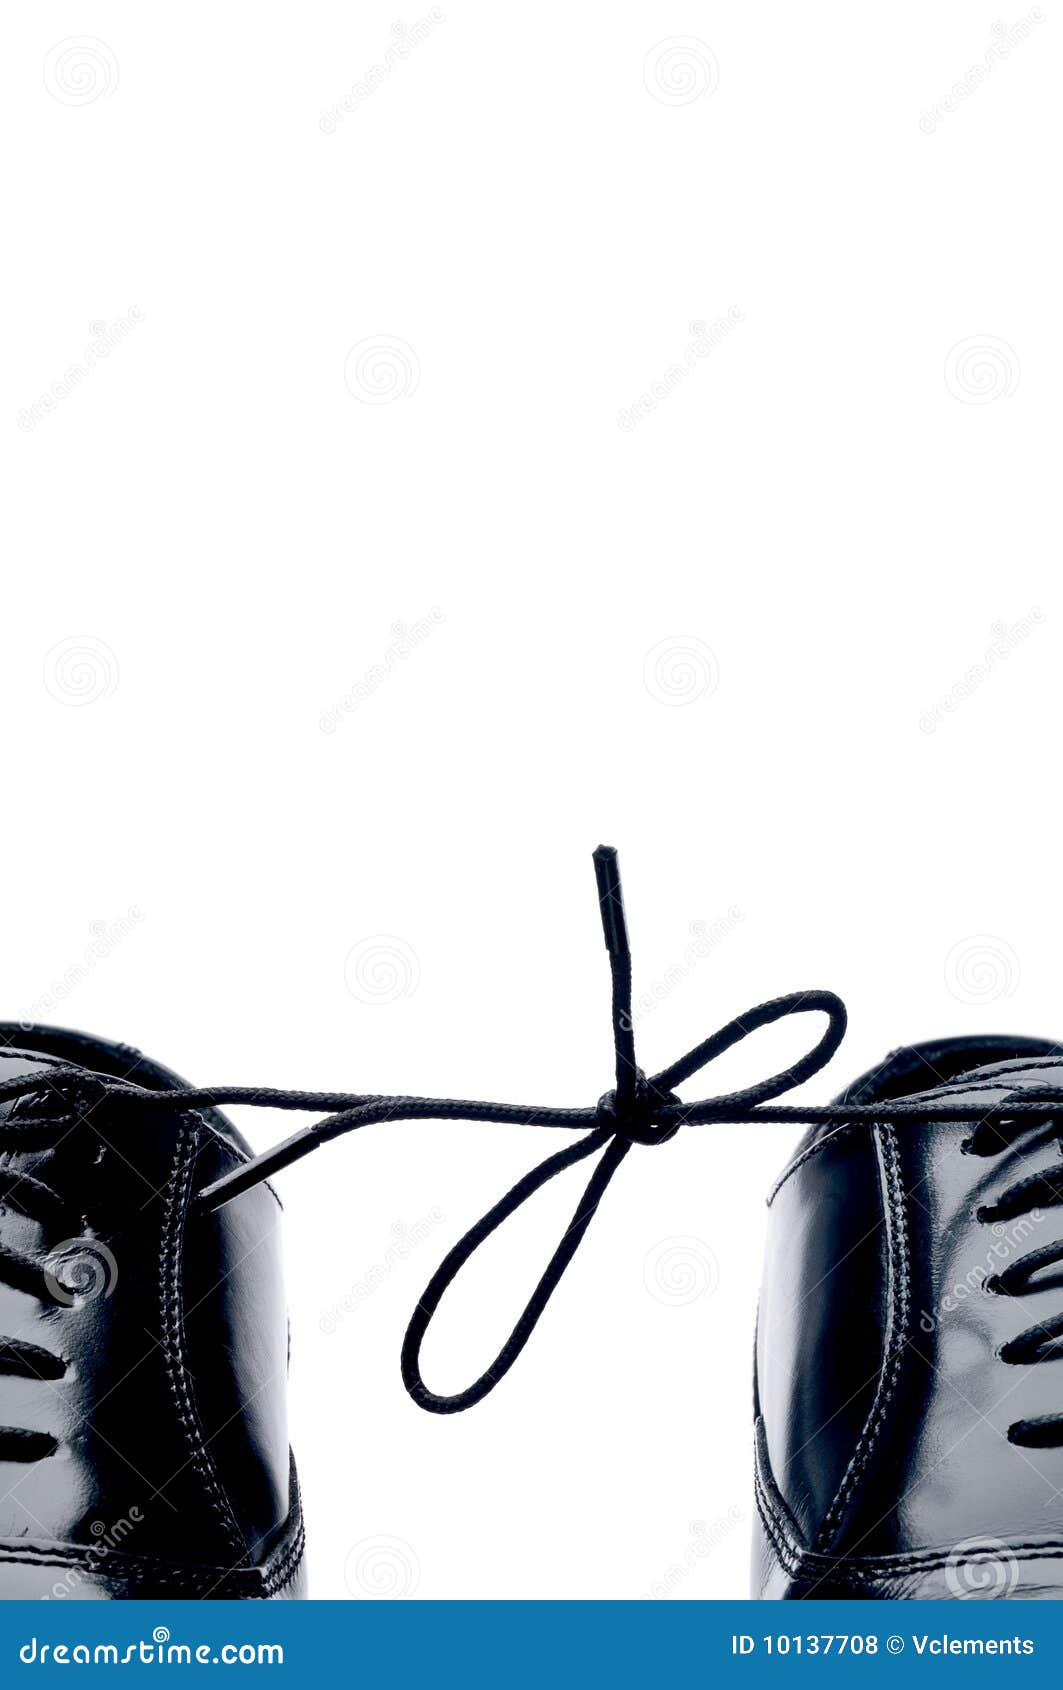 Black Leather Shoes with Thier Laces Tied Together Stock Photo - Image ...